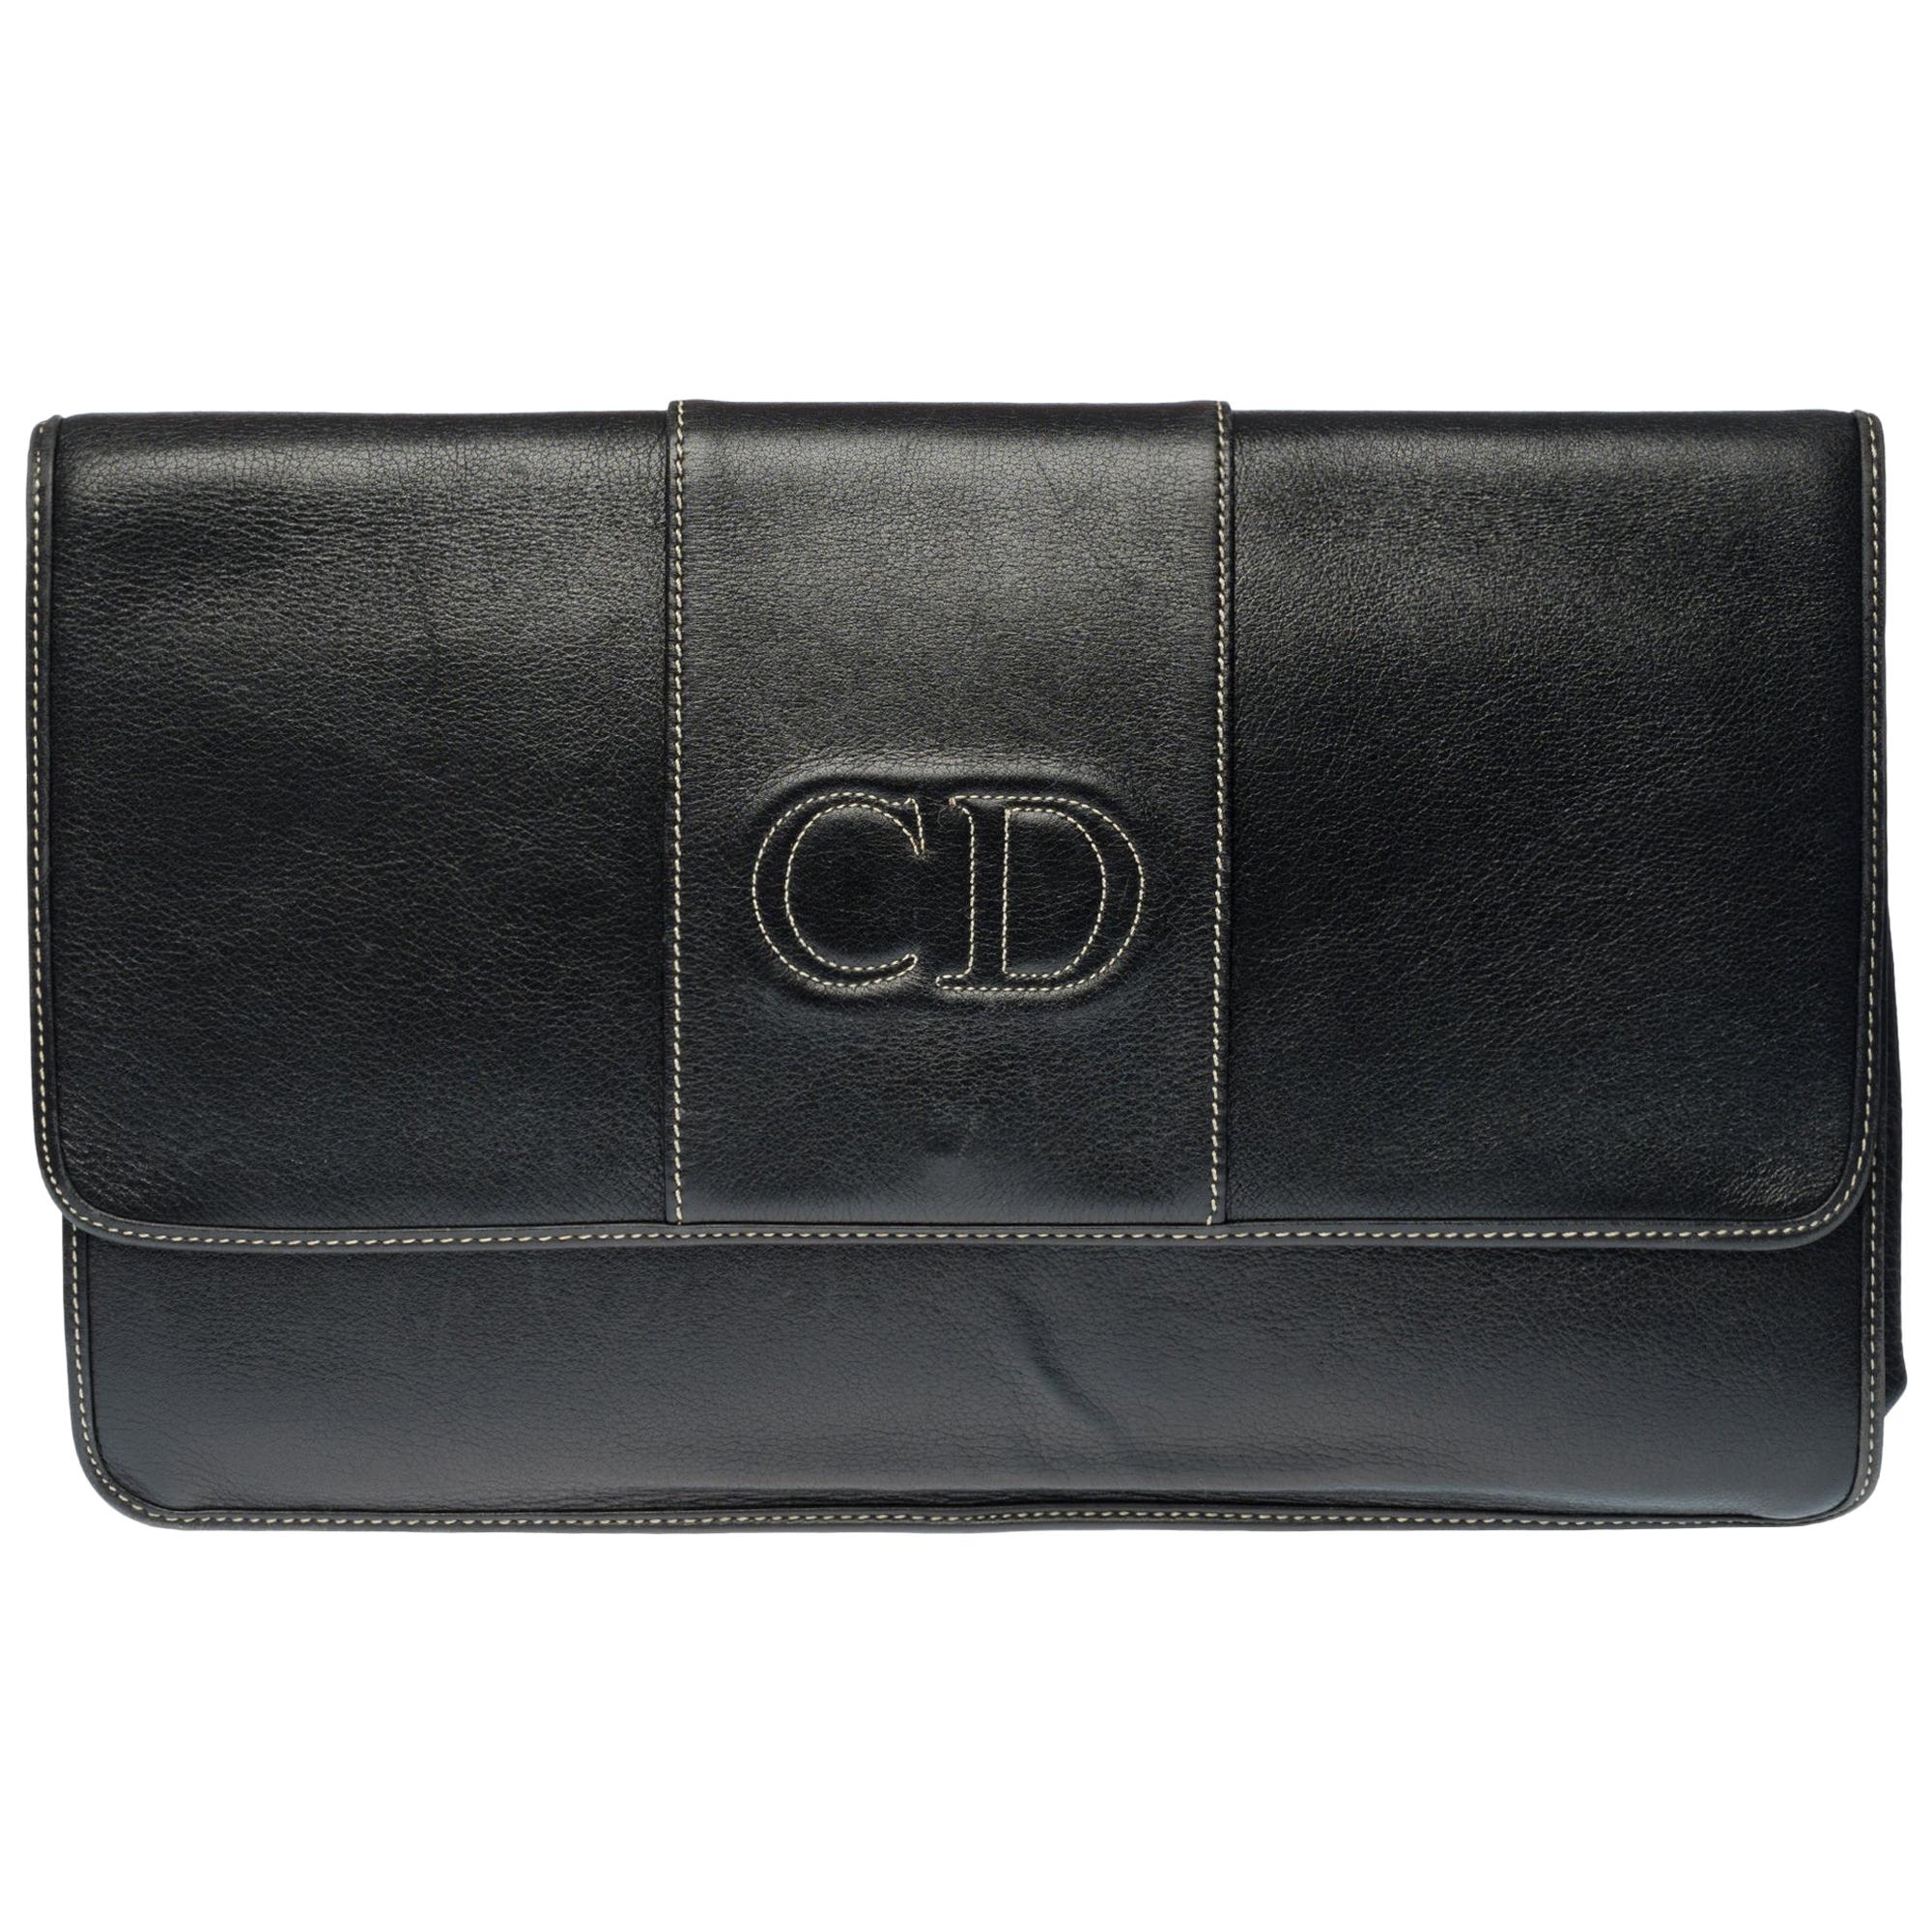 Beautiful Christian Dior Clutch in black leather For Sale